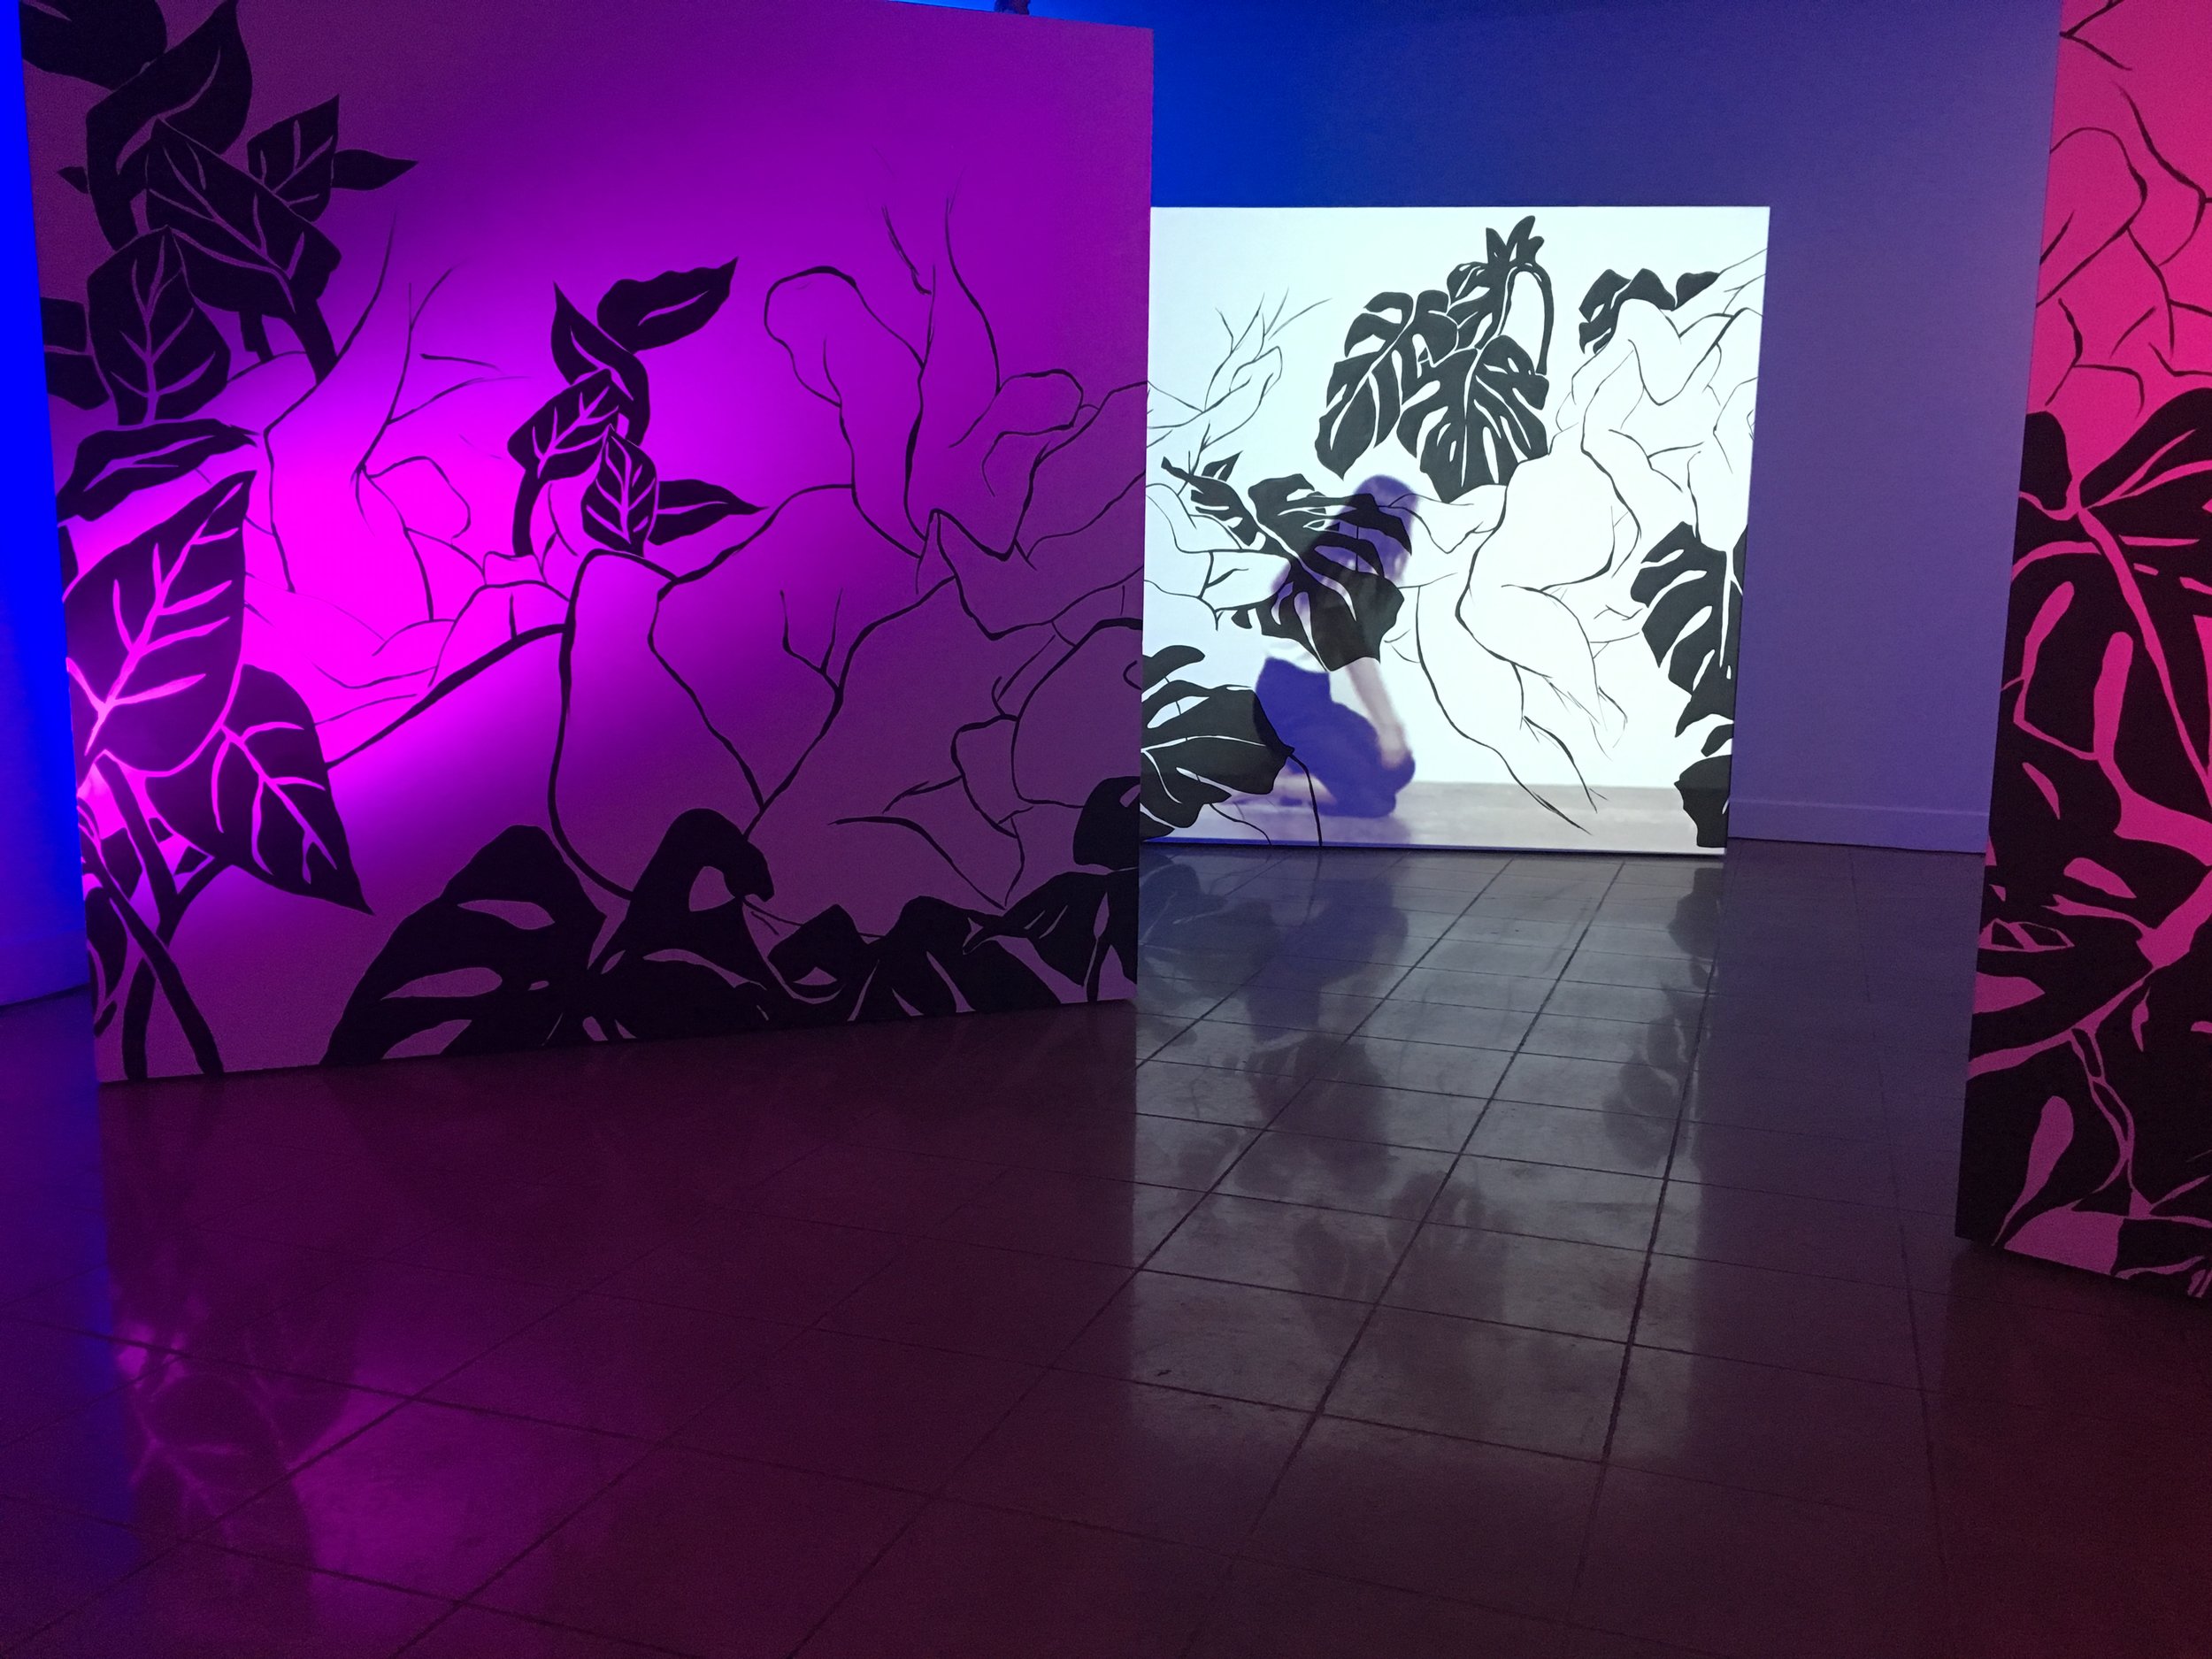 Installation View of "Afterlight"